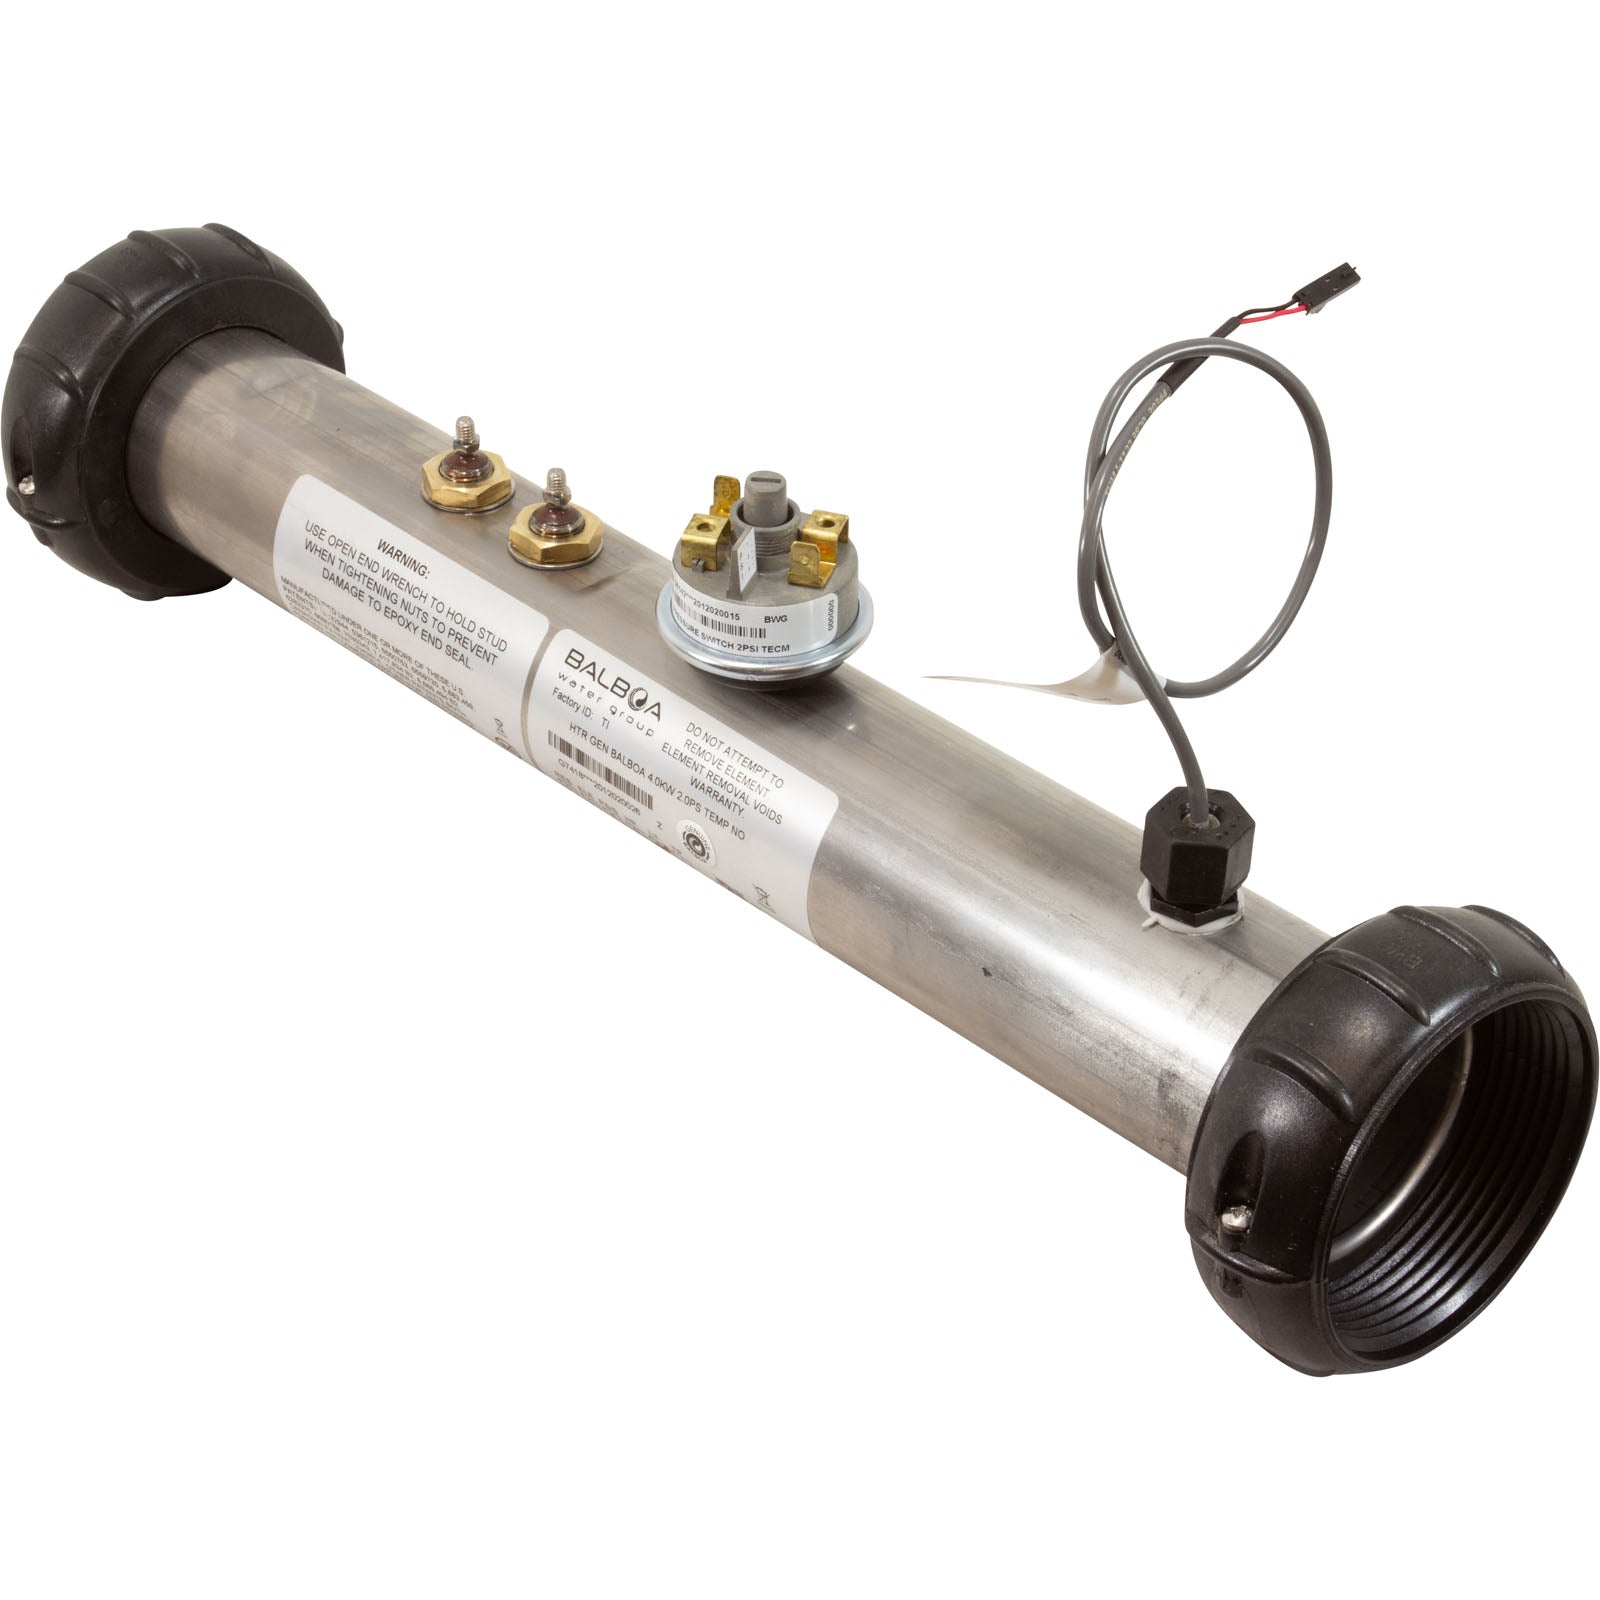 Balboa 15" 4.0 kW Spa Heater Assembly With Sensor and Pressure Switch SW Value and LE System (58019)